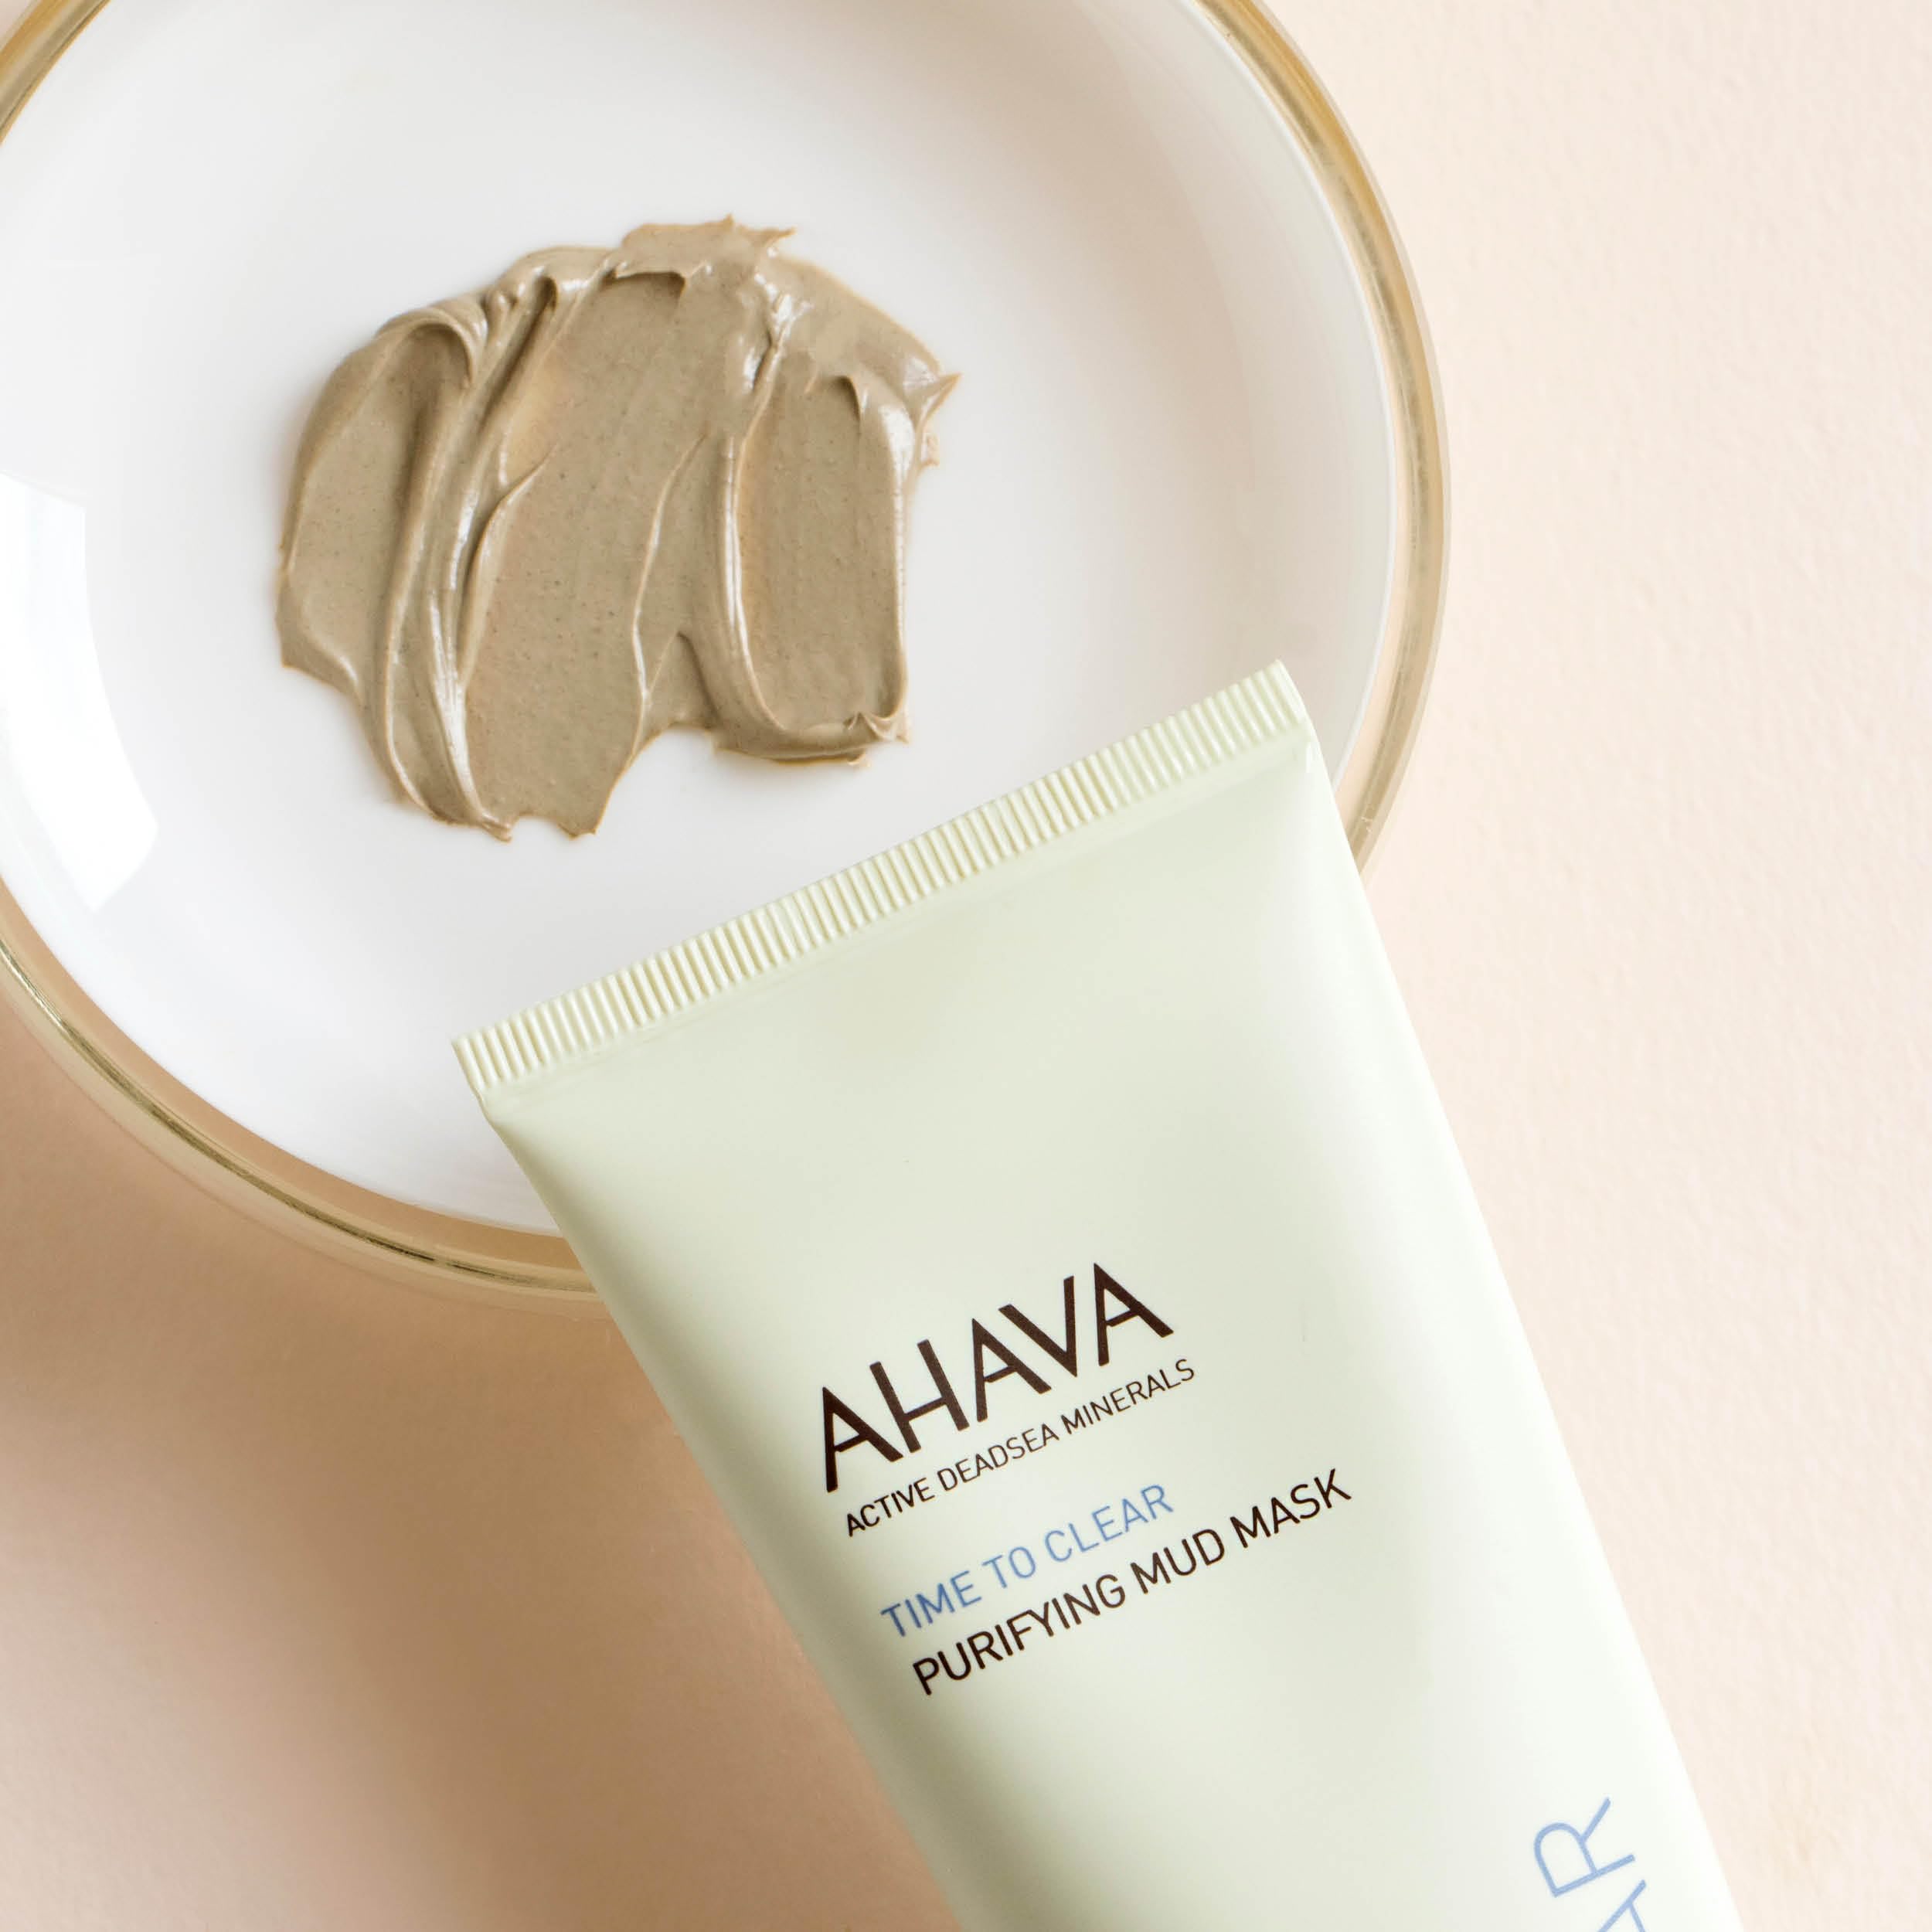 AHAVA Purifying Mud Mask - Indulging Mud Mask Cleaning & Purifying the Skin, Soothes, Softens & Clarifies, Enriched with Exclusive Osmoter, Dead Sea Mud, Aloe Vera, Vitamin B5 & Jojoba Oil, 3.4 Fl.Oz